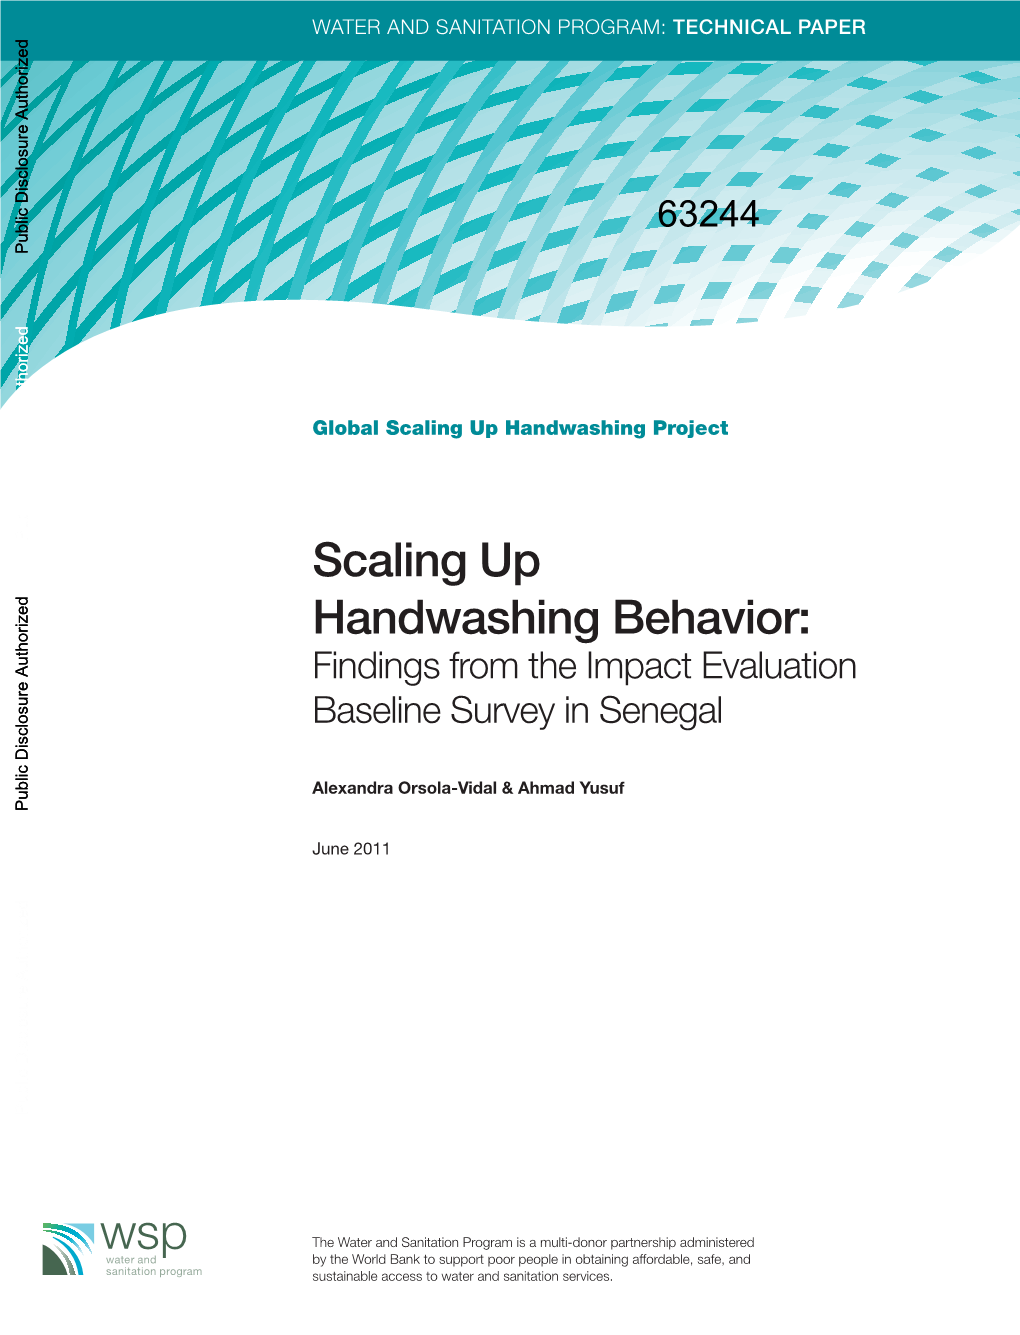 Scaling up Handwashing Behavior: Findings from the Impact Evaluation Baseline Survey in Senegal